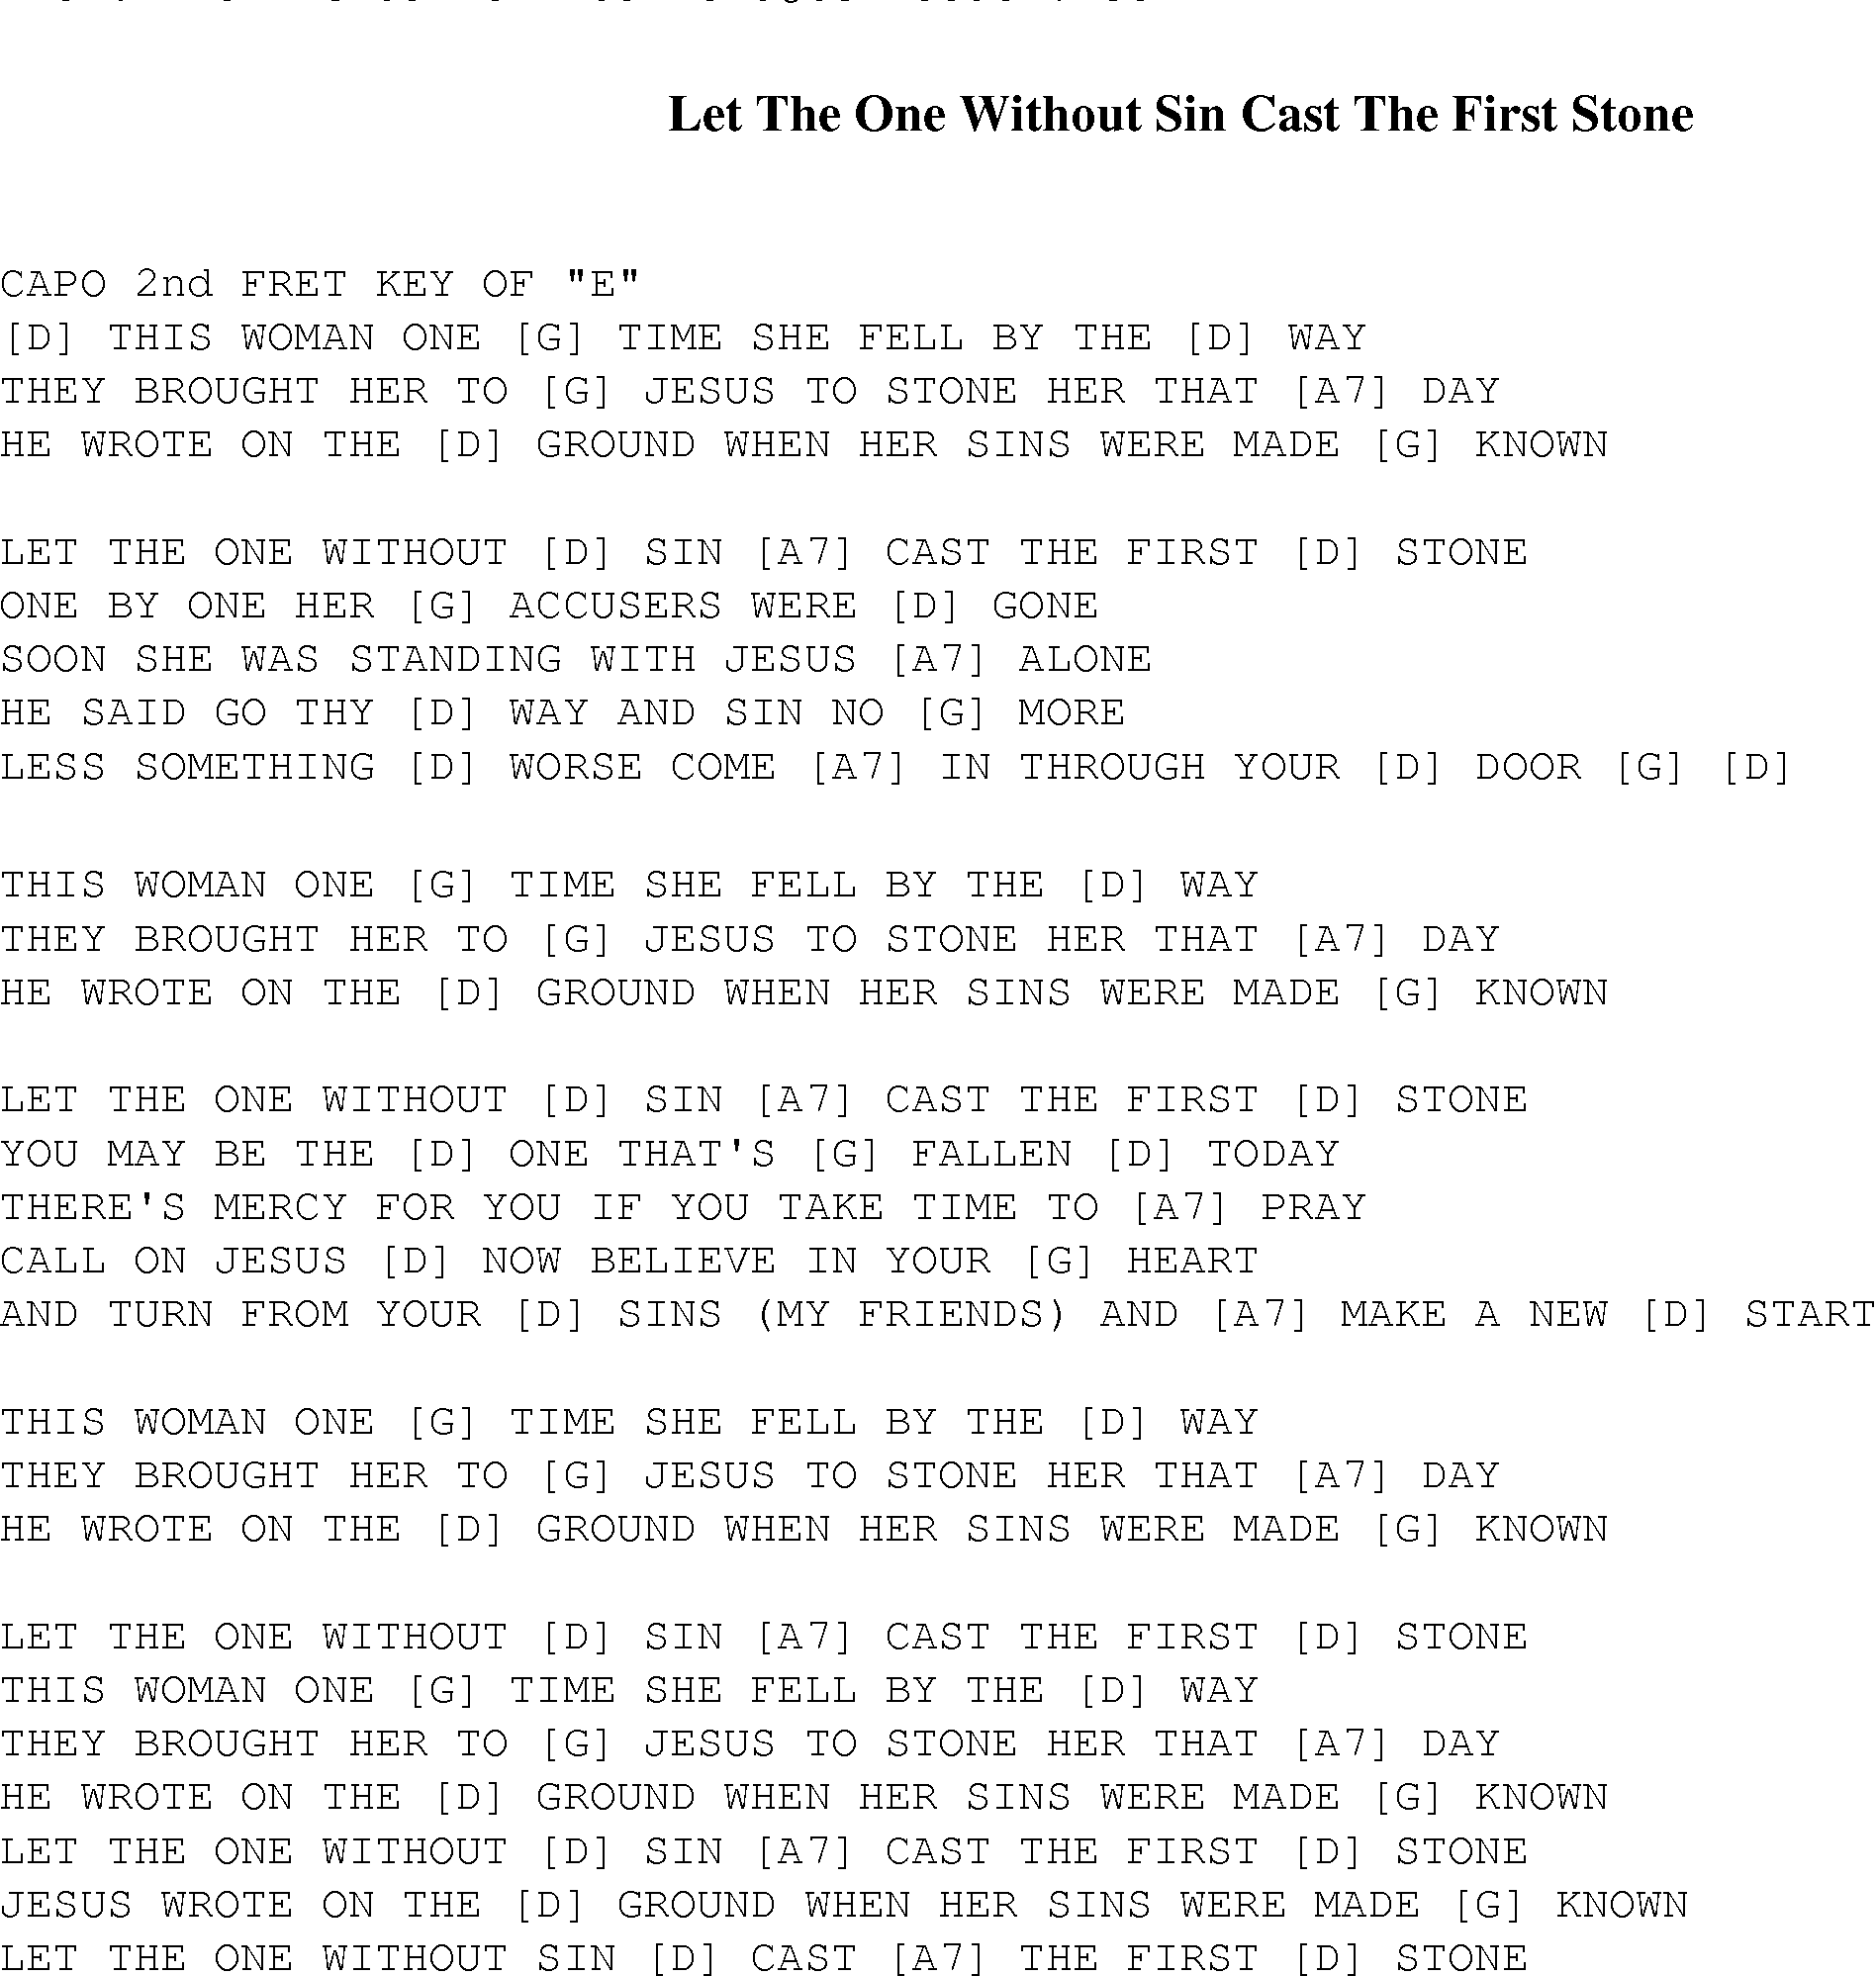 Gospel Song: let_the_one_without_sin_cast_the_first_stone, lyrics and chords.